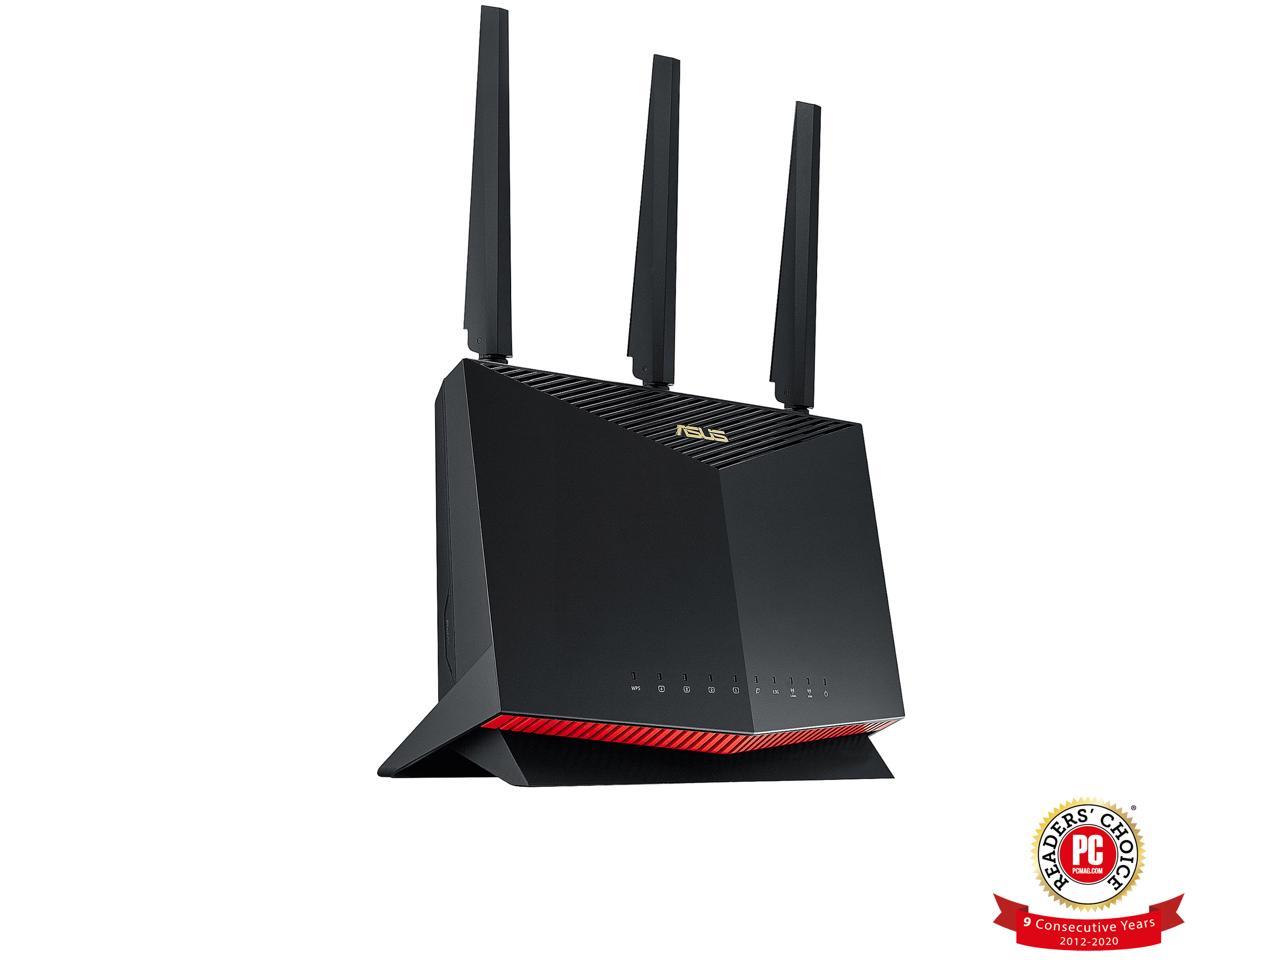 ASUS RT-AX86U AX5700 Dual Band WiFi 6 Gaming Router, WiFi 6 802.11ax, Mobile Game Mode, Lifetime Free Internet Security, Mesh Wi